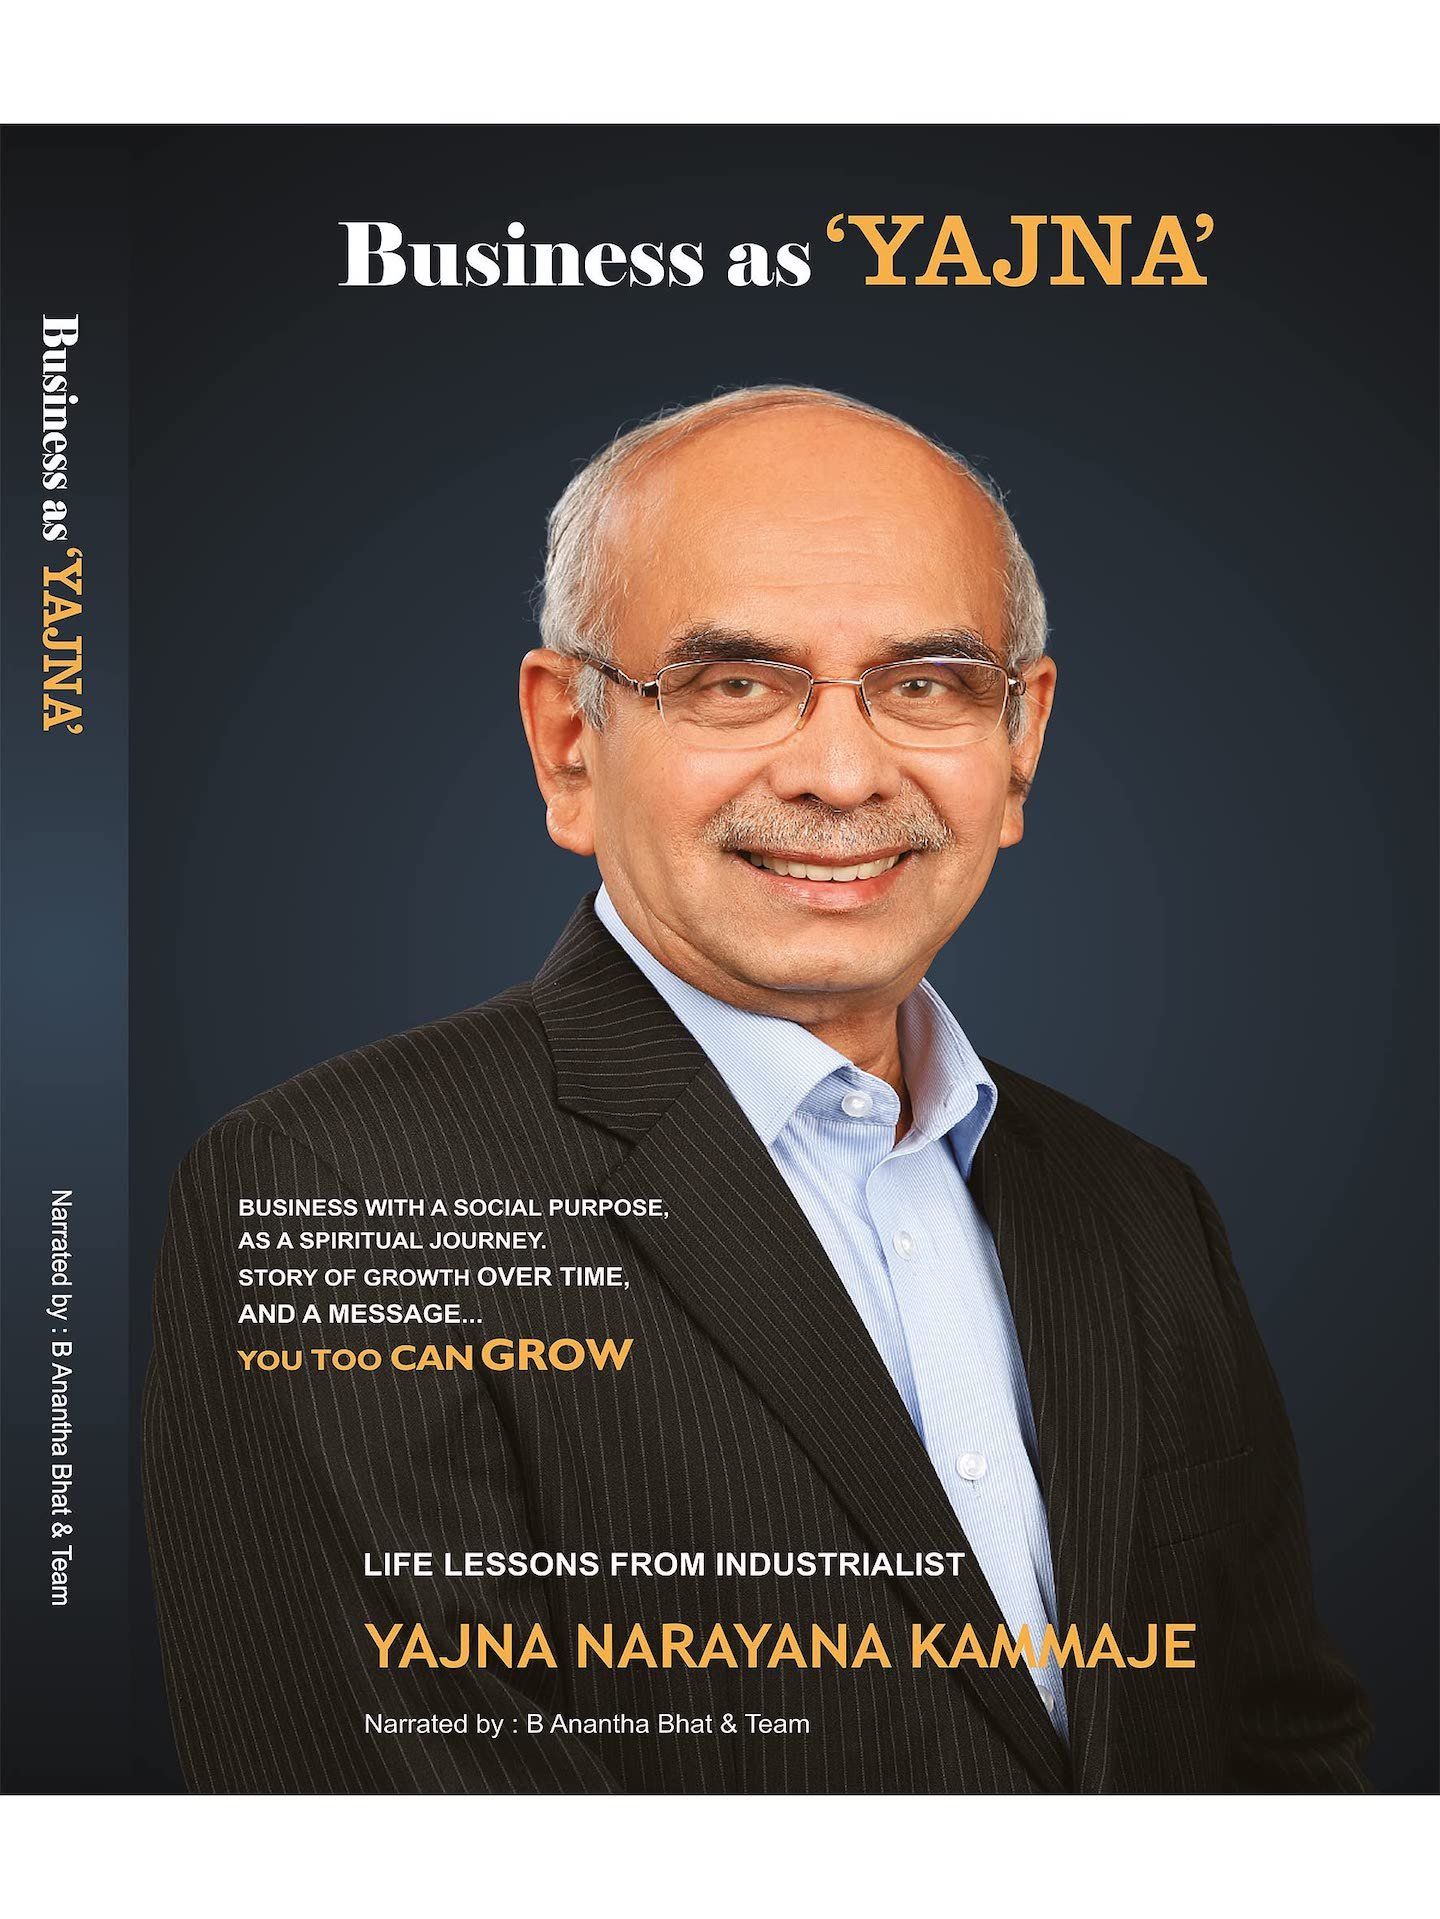 Business as ‘Yajna’ by B Anantha Bhat